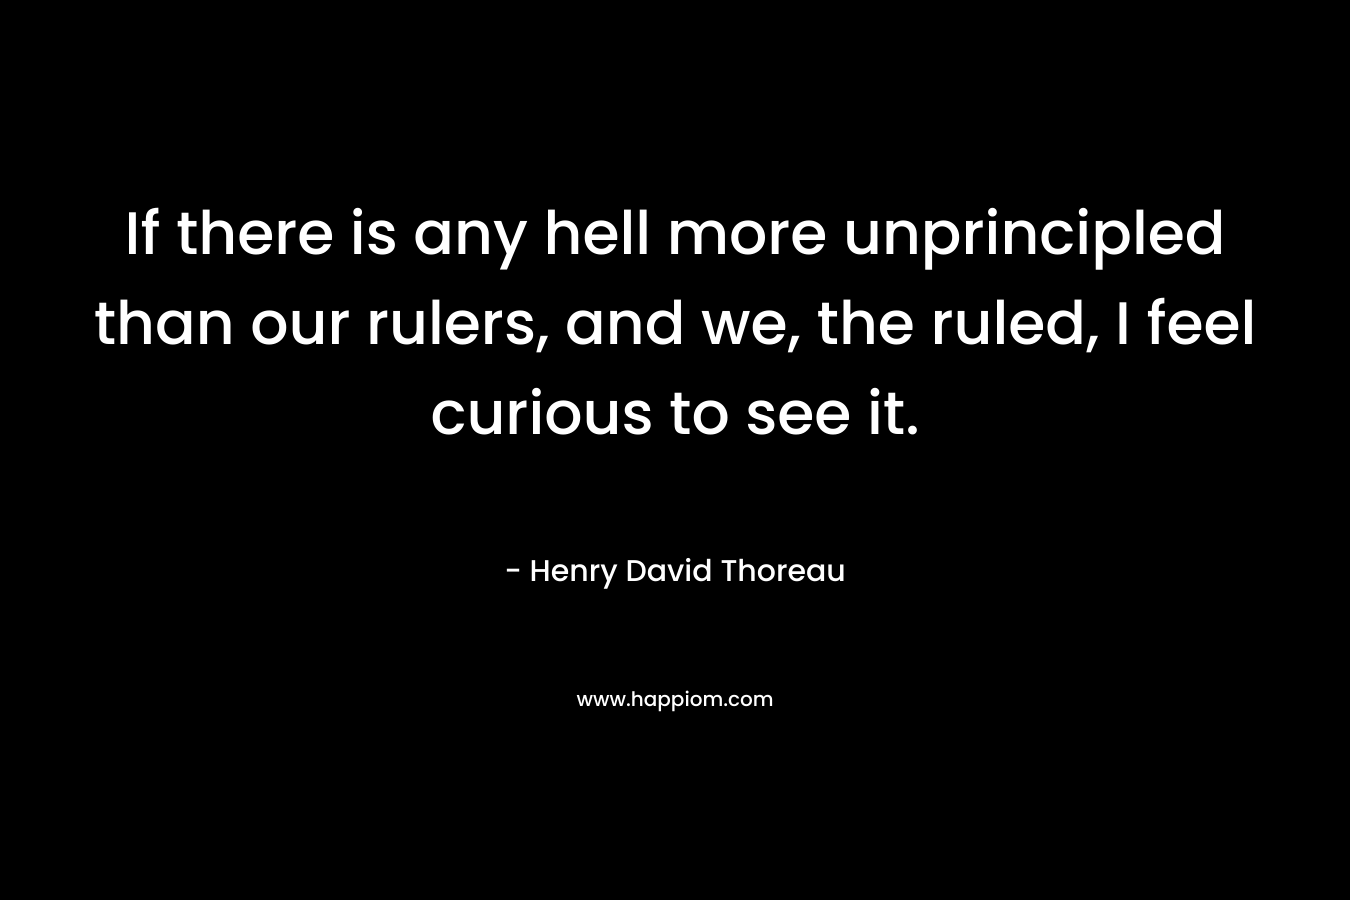 If there is any hell more unprincipled than our rulers, and we, the ruled, I feel curious to see it. – Henry David Thoreau